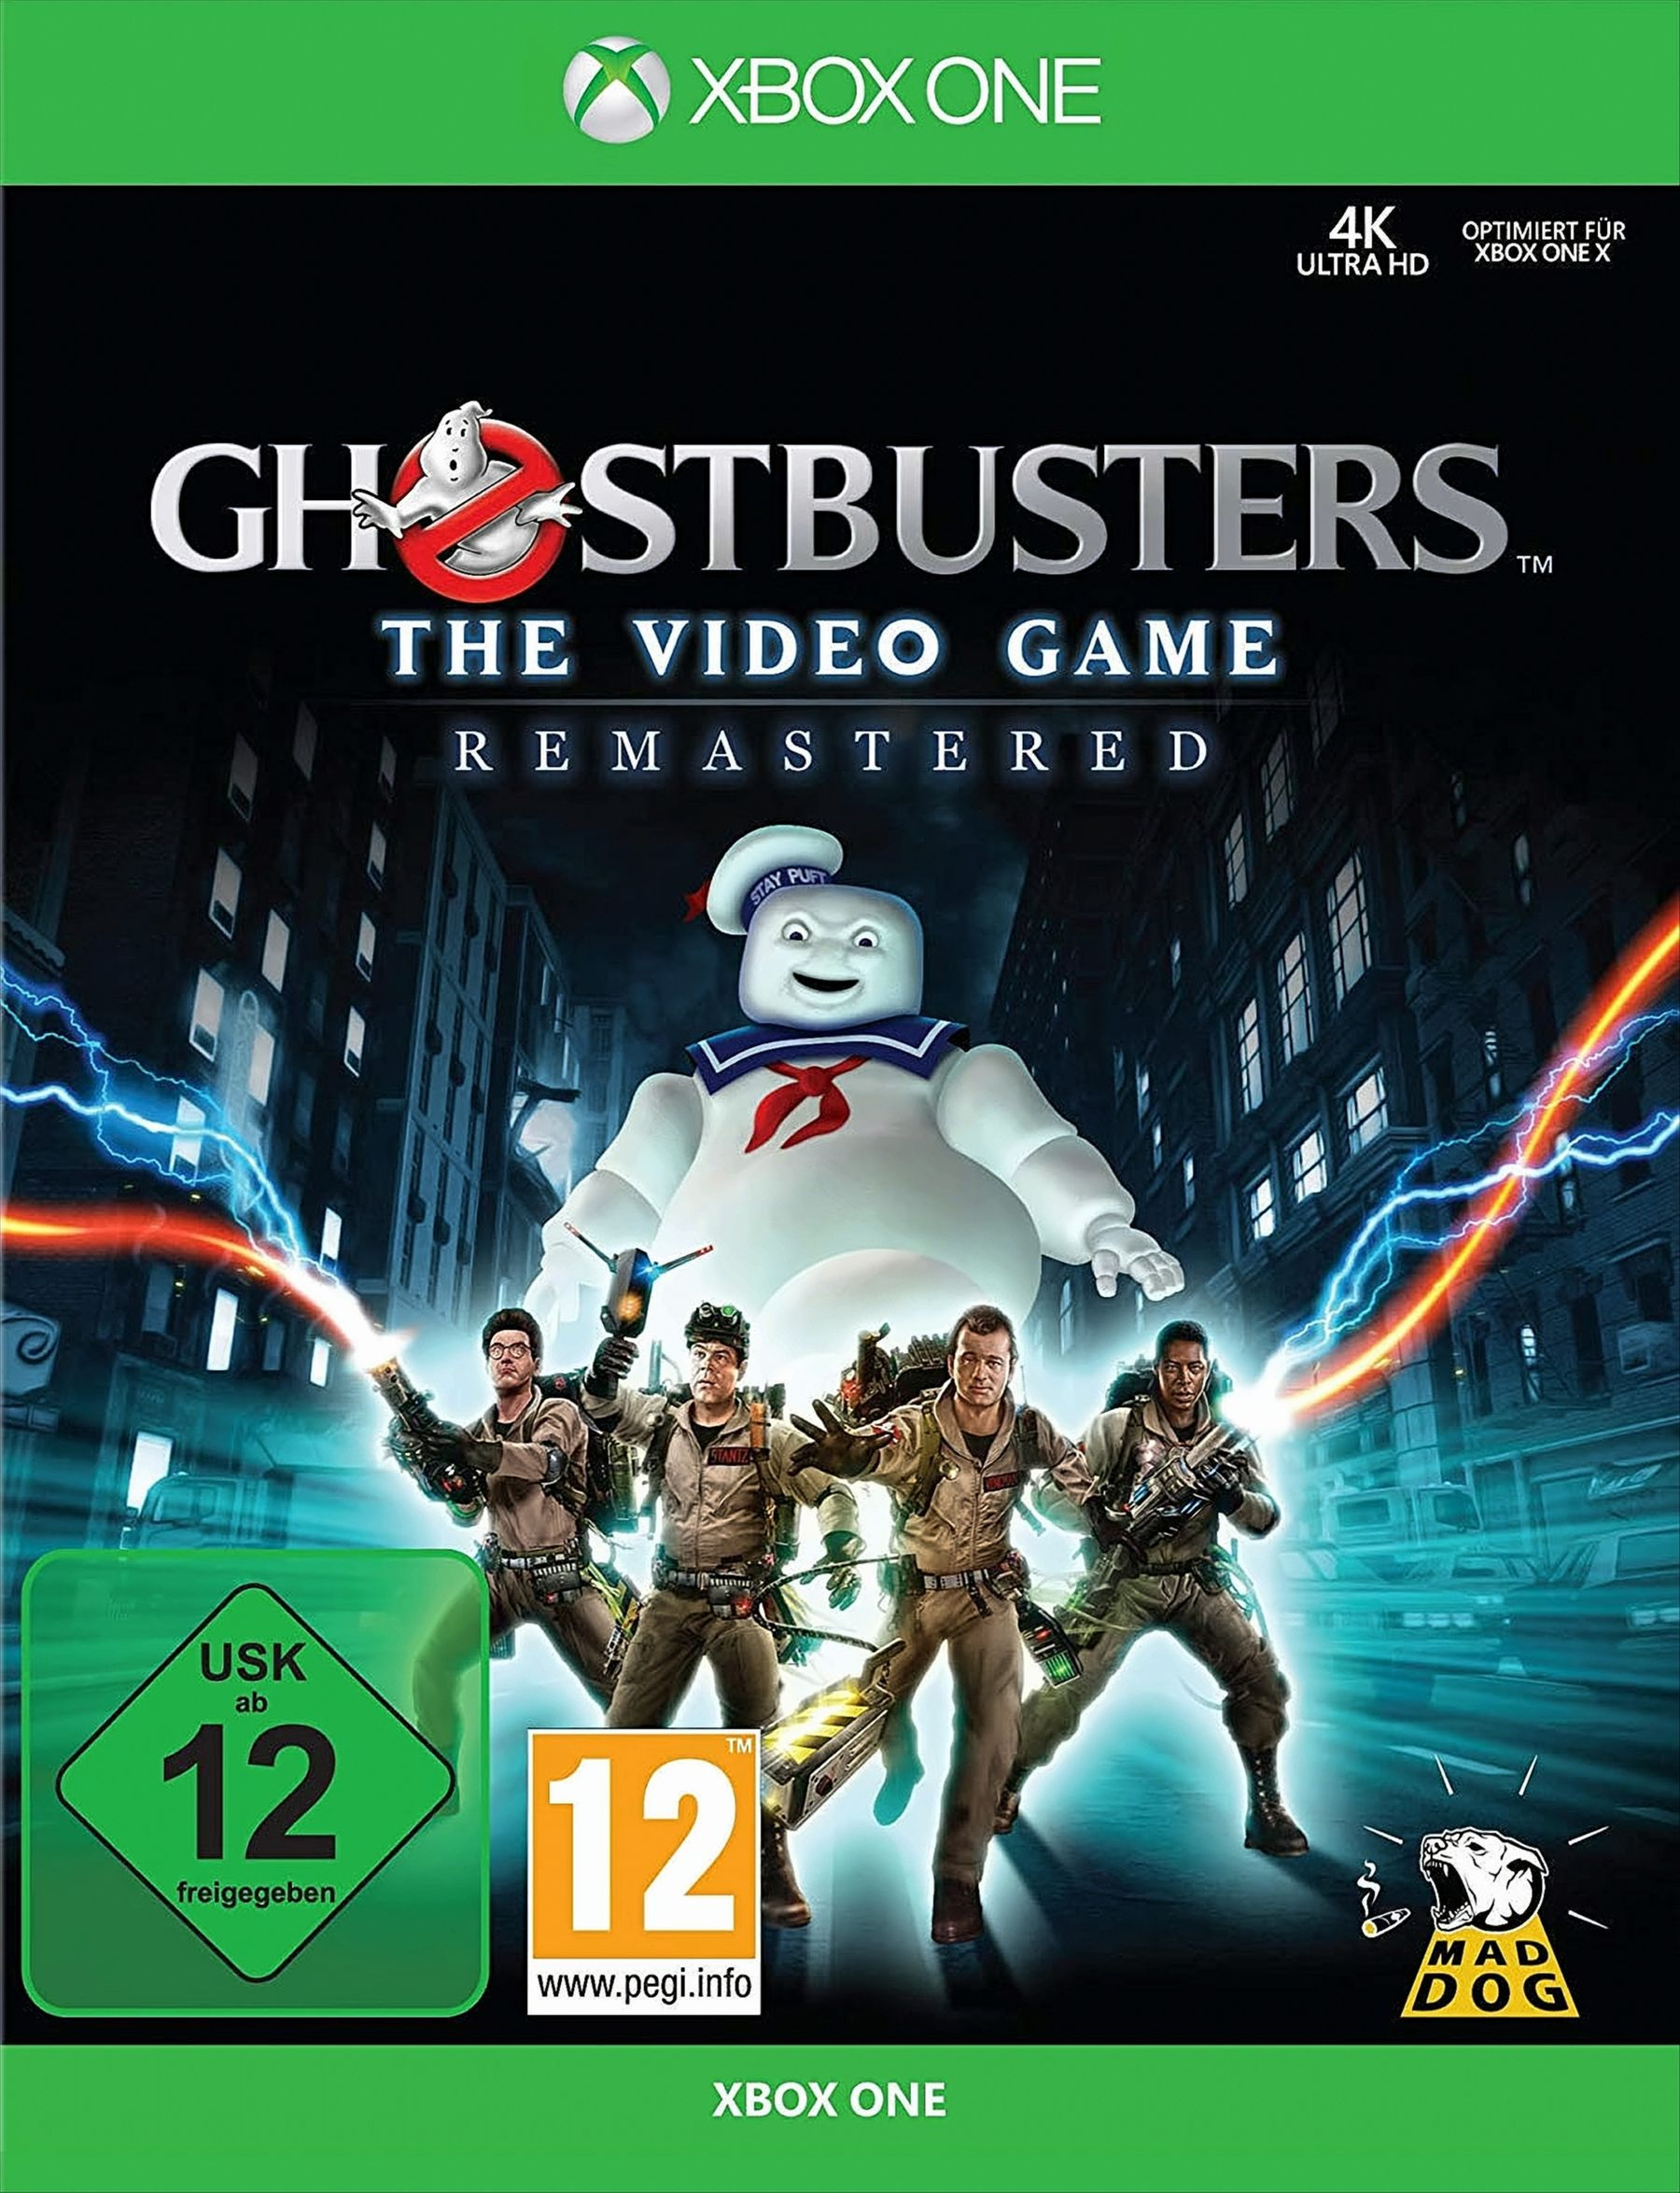 The Video [Xbox One] - Ghostbusters Remastered Game